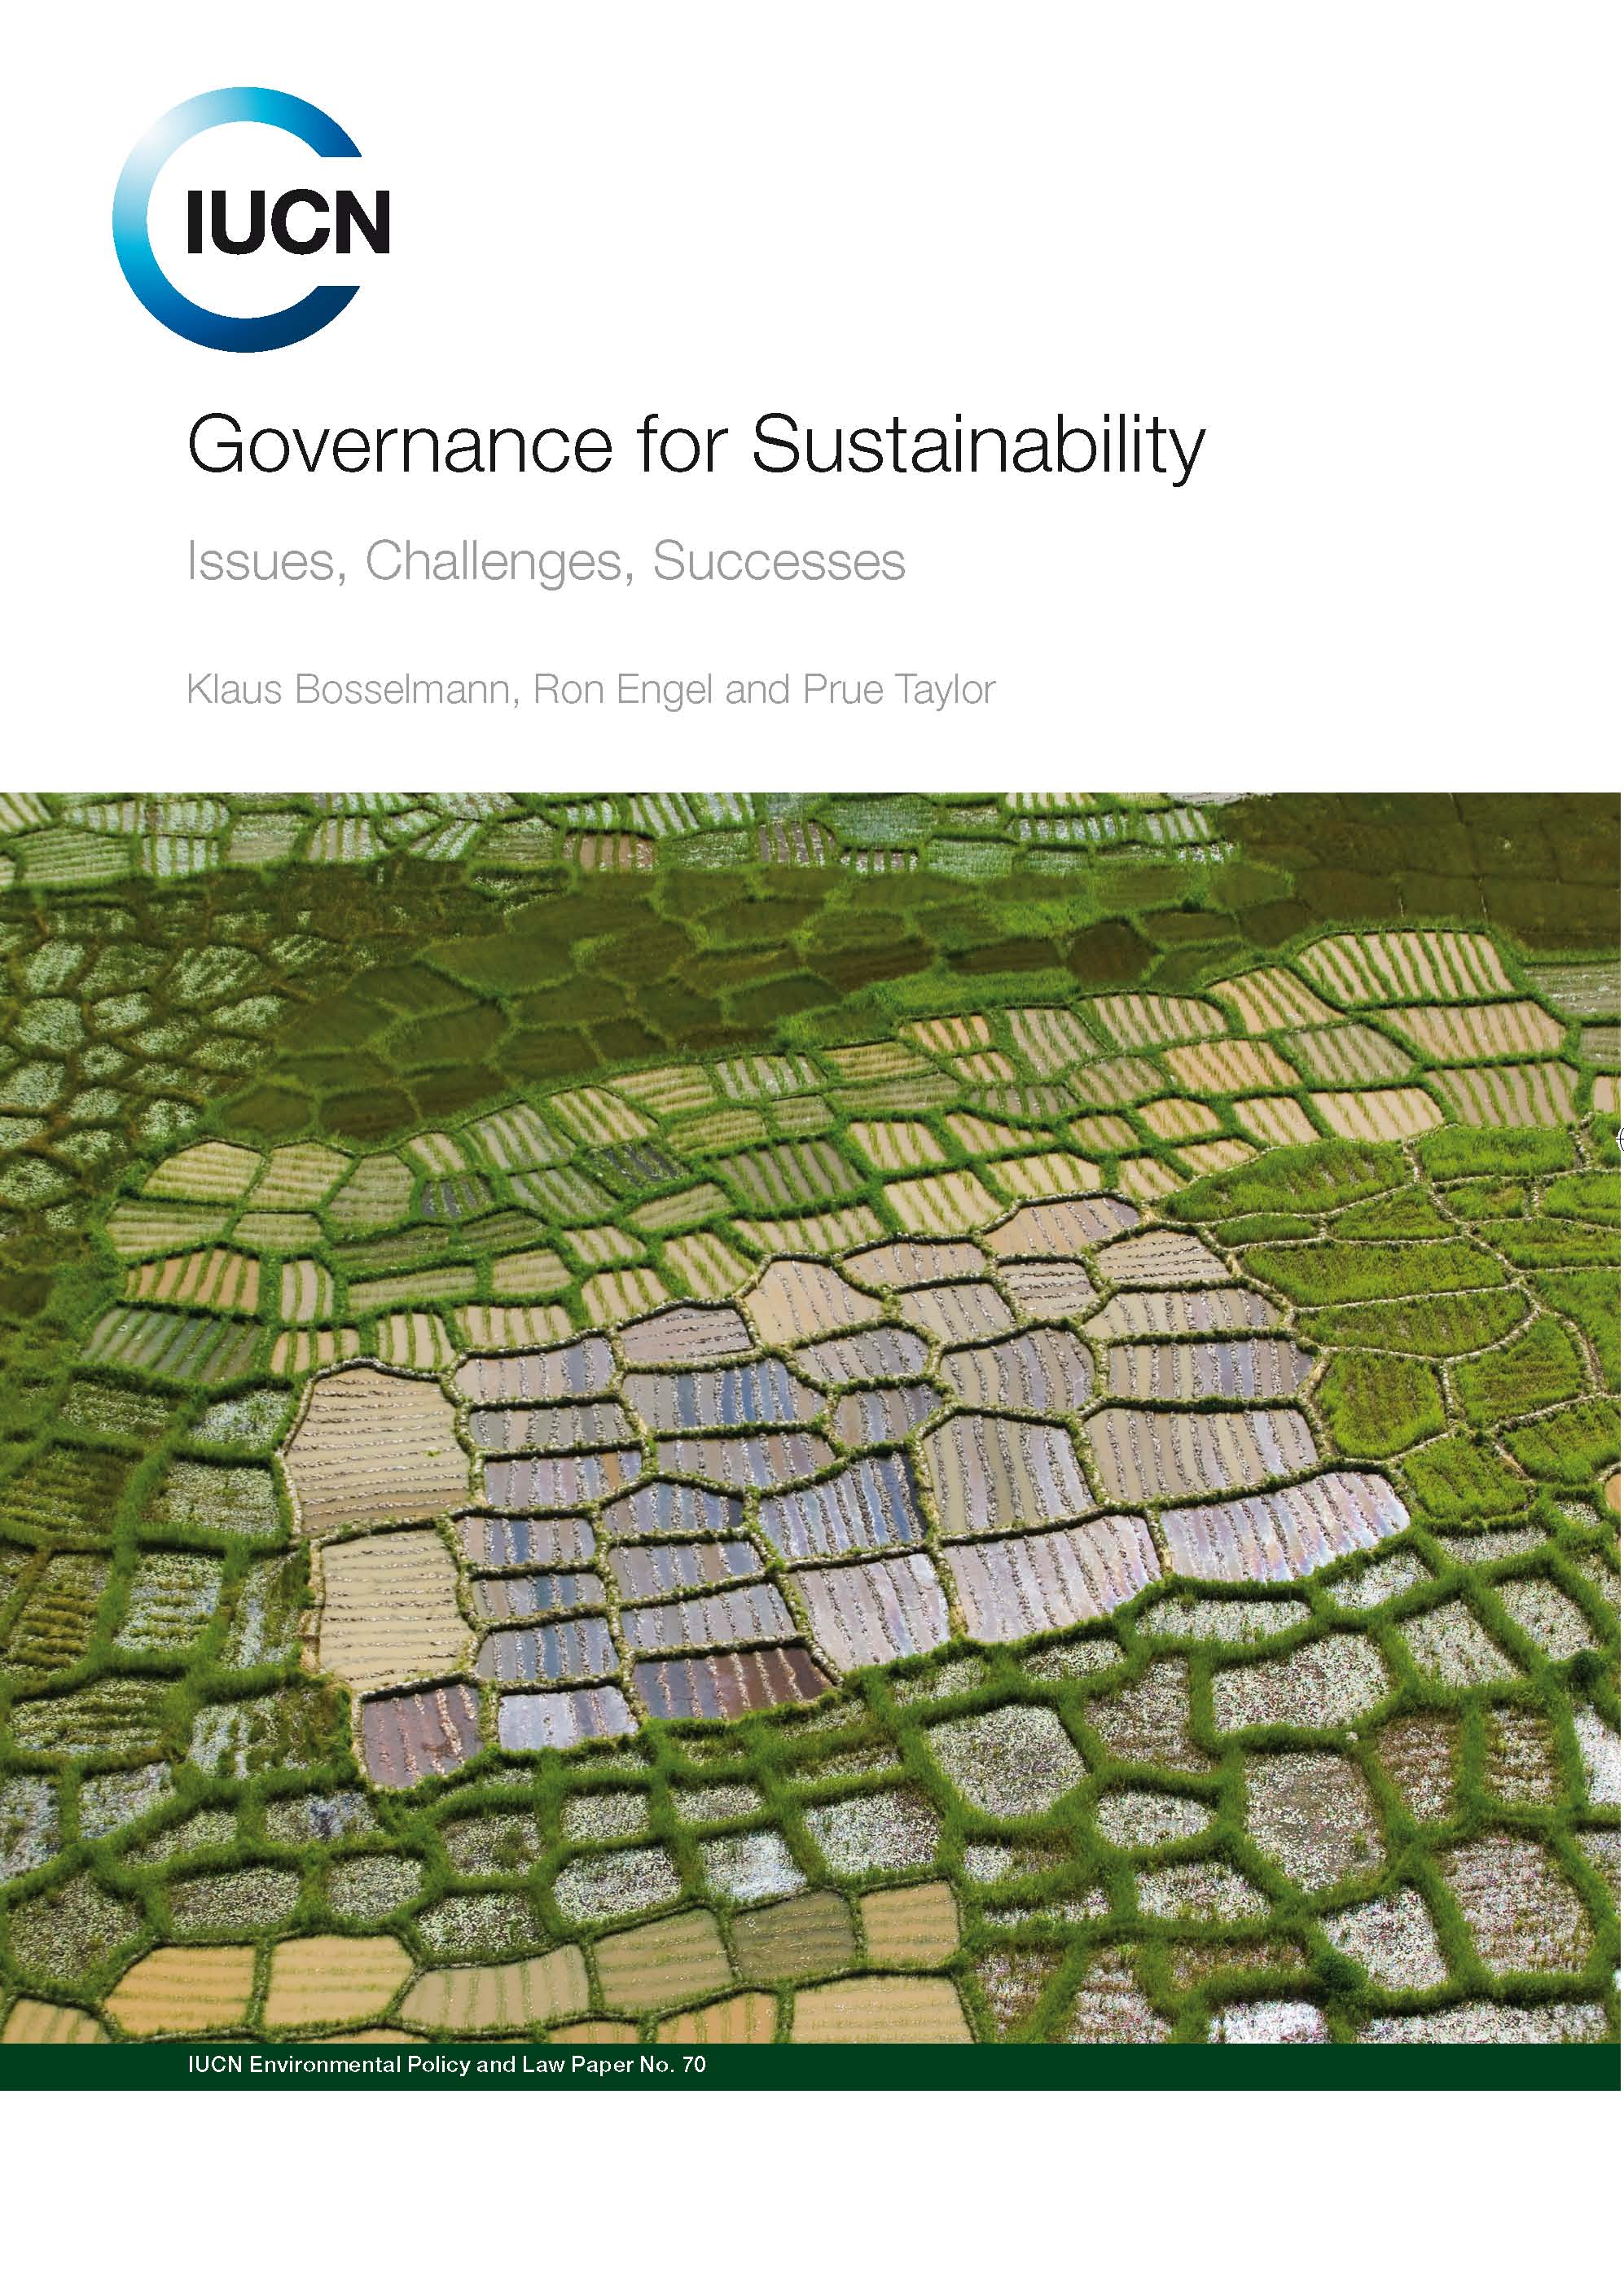 EPLP No. 70 Governance for Sustainability - Issues, Challenges, Successes